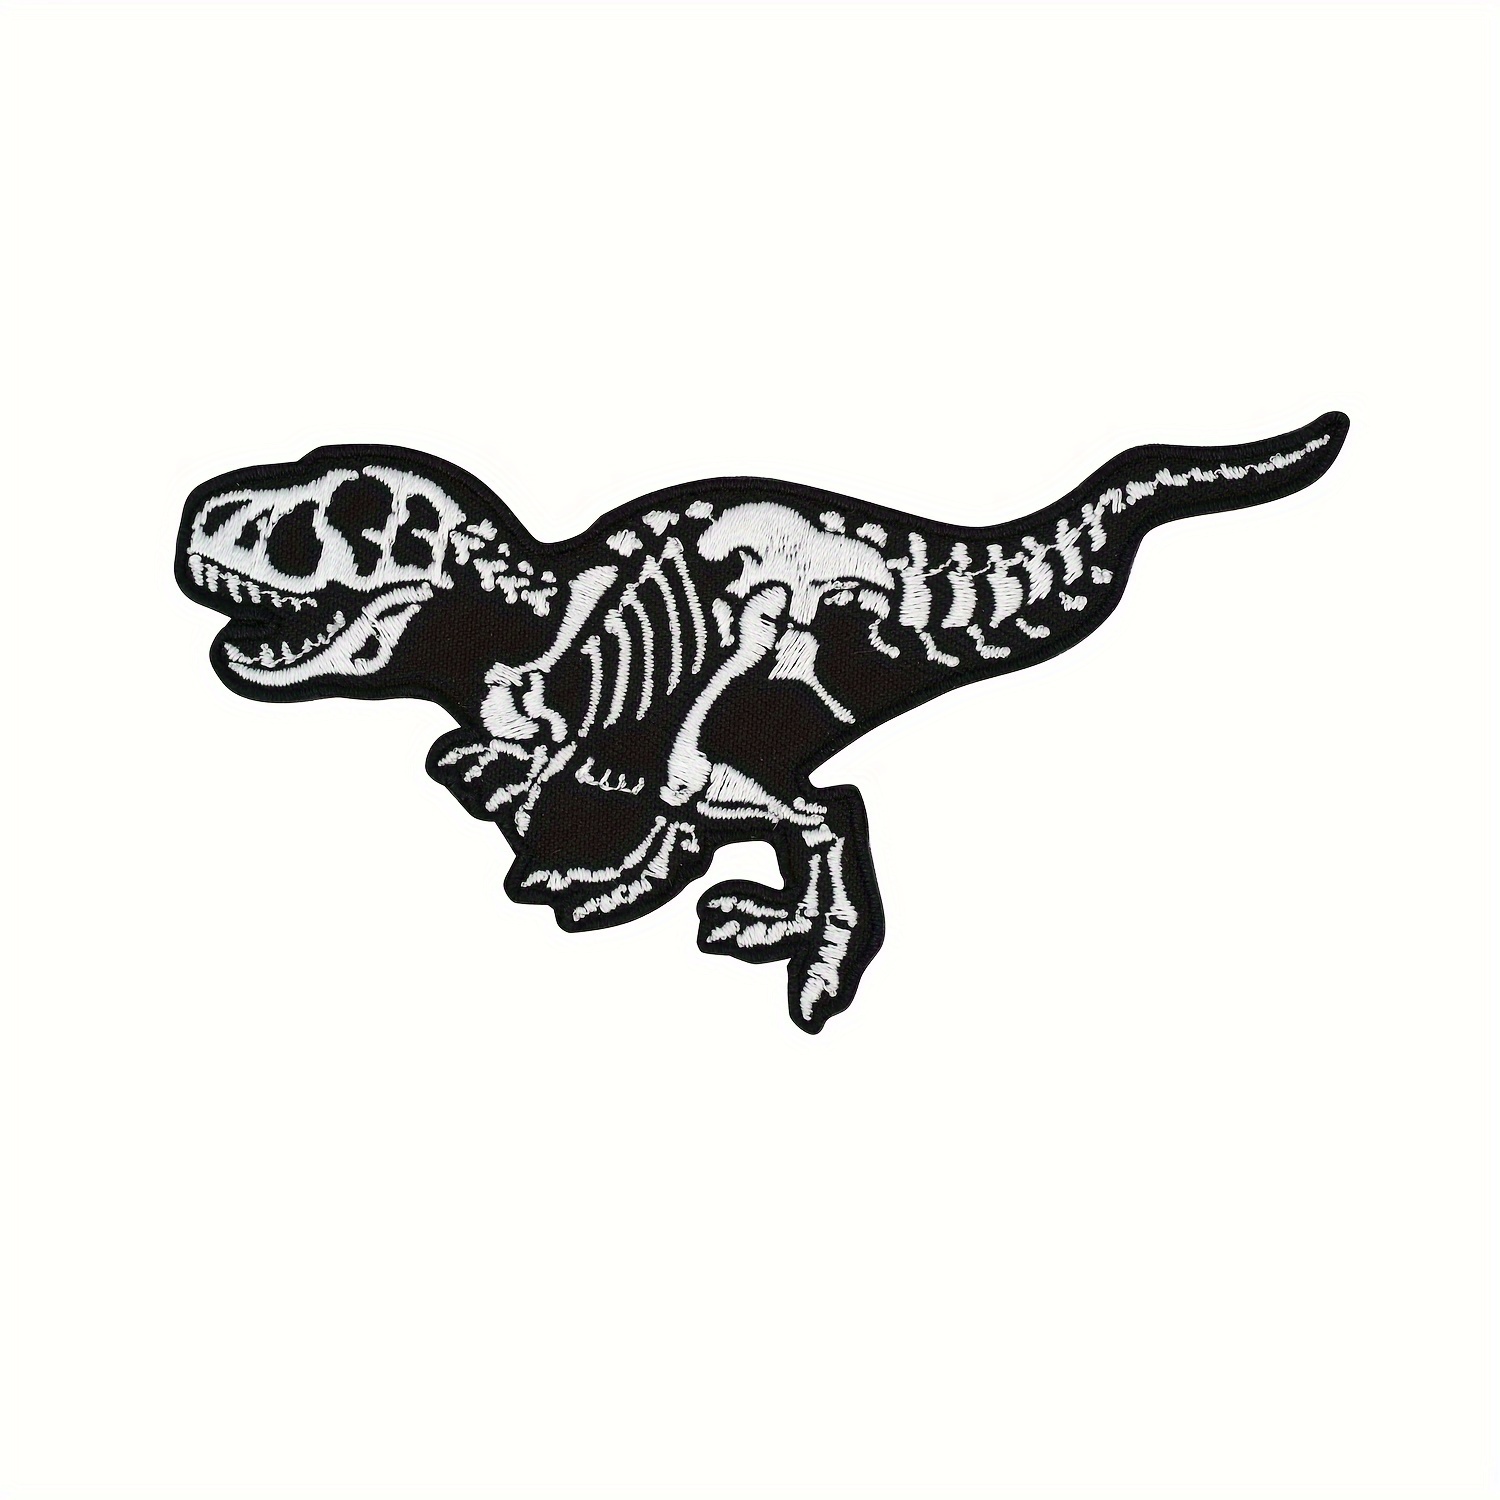 

1pc, Adorable Cool Y2k Embroidery Heat Transfer Film, Dinosaur Skeleton Pattern Iron On Patch, Vintage Stamp Label Badge Logo, For Clothing T-shirt Pillow Bag Diy Supplies